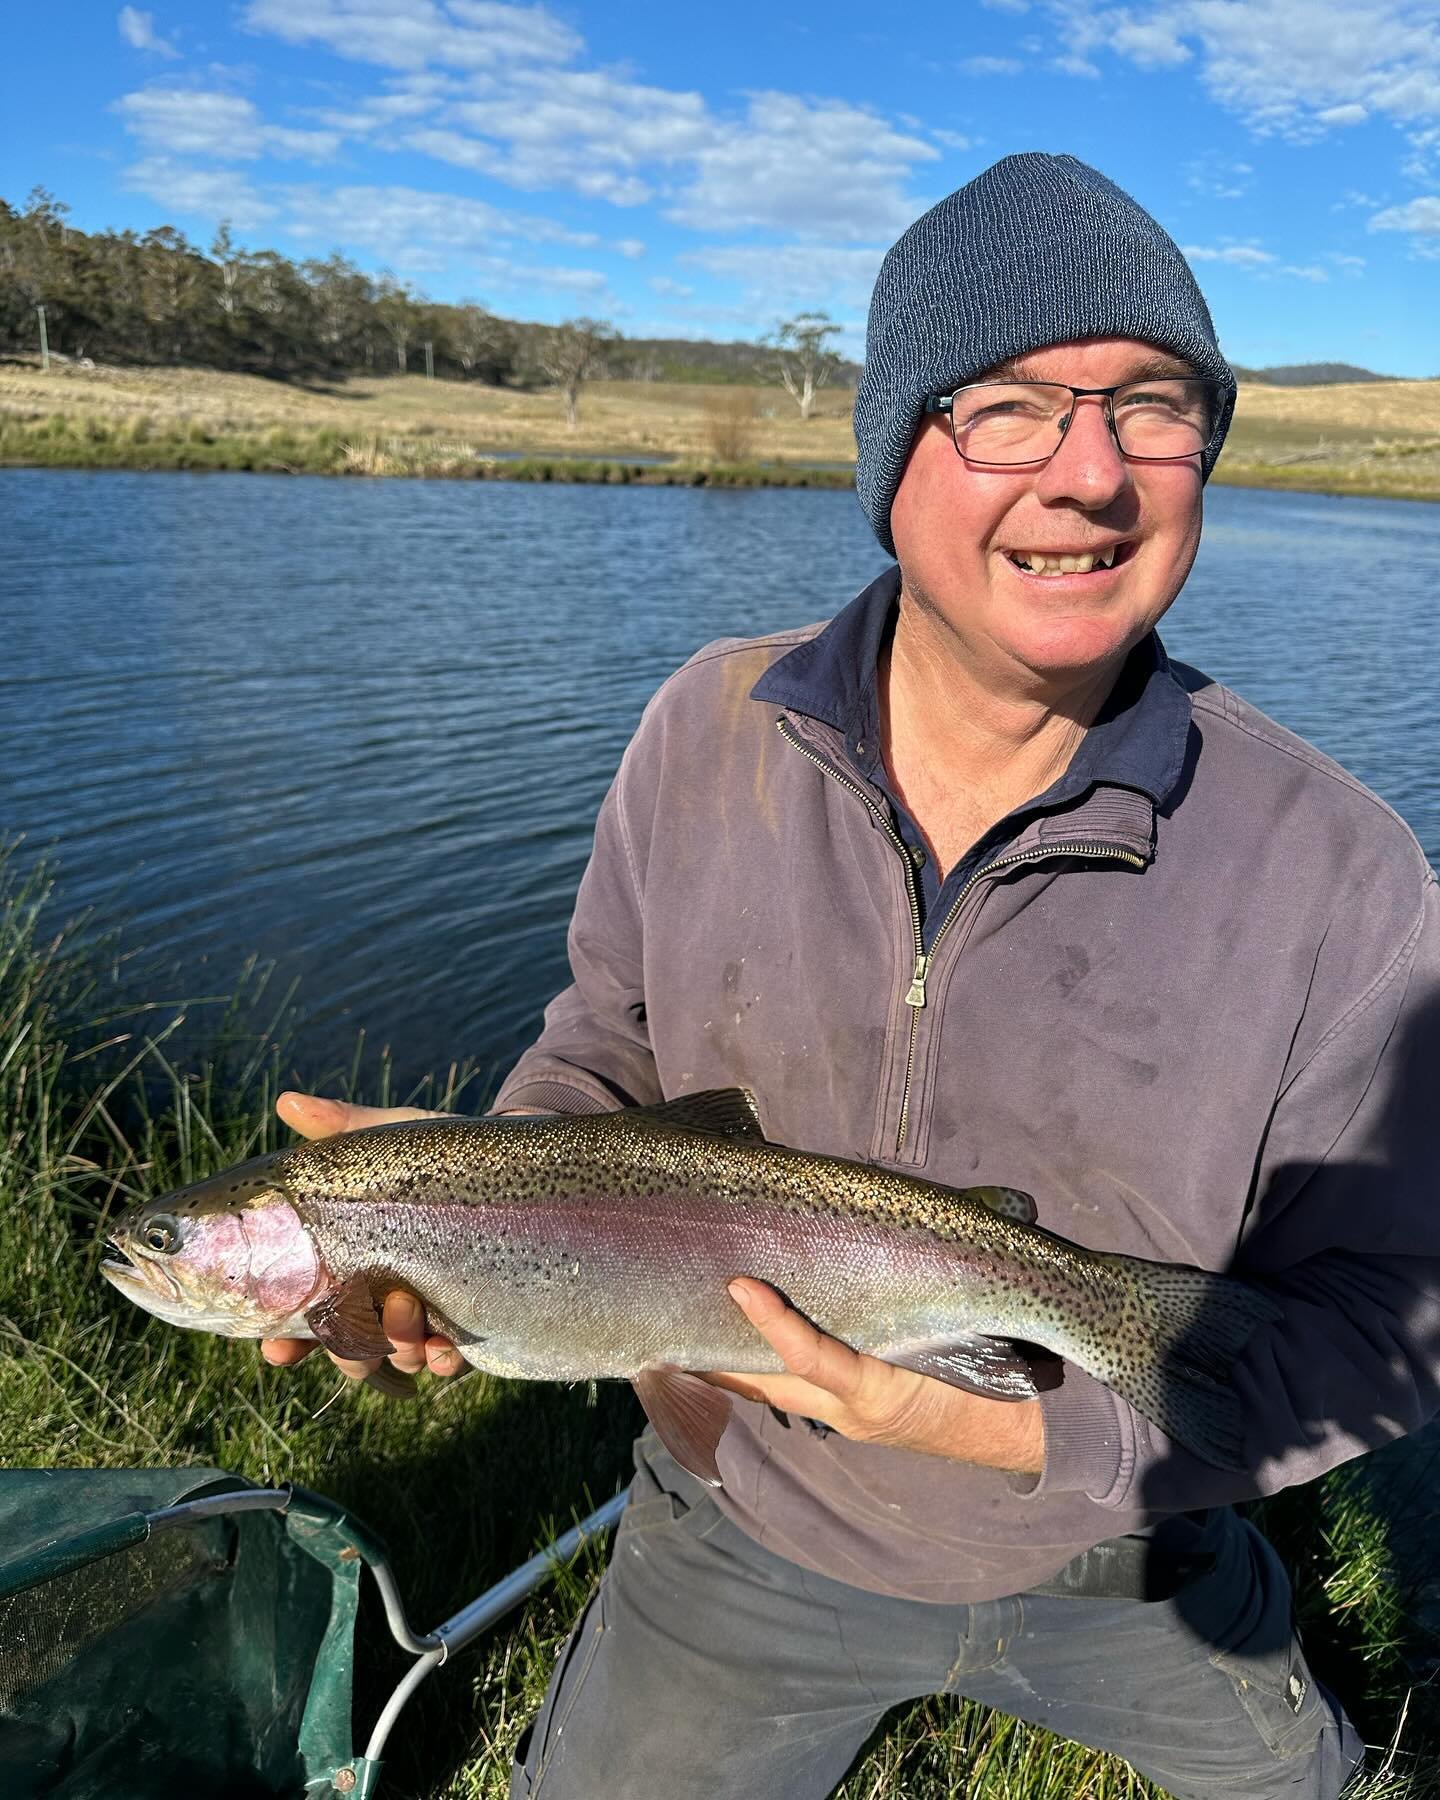 The farmer landed a superb big Rainbow Trout yesterday in &lsquo;Circus Lake&rsquo; on the fly.  Did you know our season goes all year round and you don&rsquo;t need a licence? #28gates #farmstaytasmania #rainbowtrout #troutfishingtasmania #flyfishin